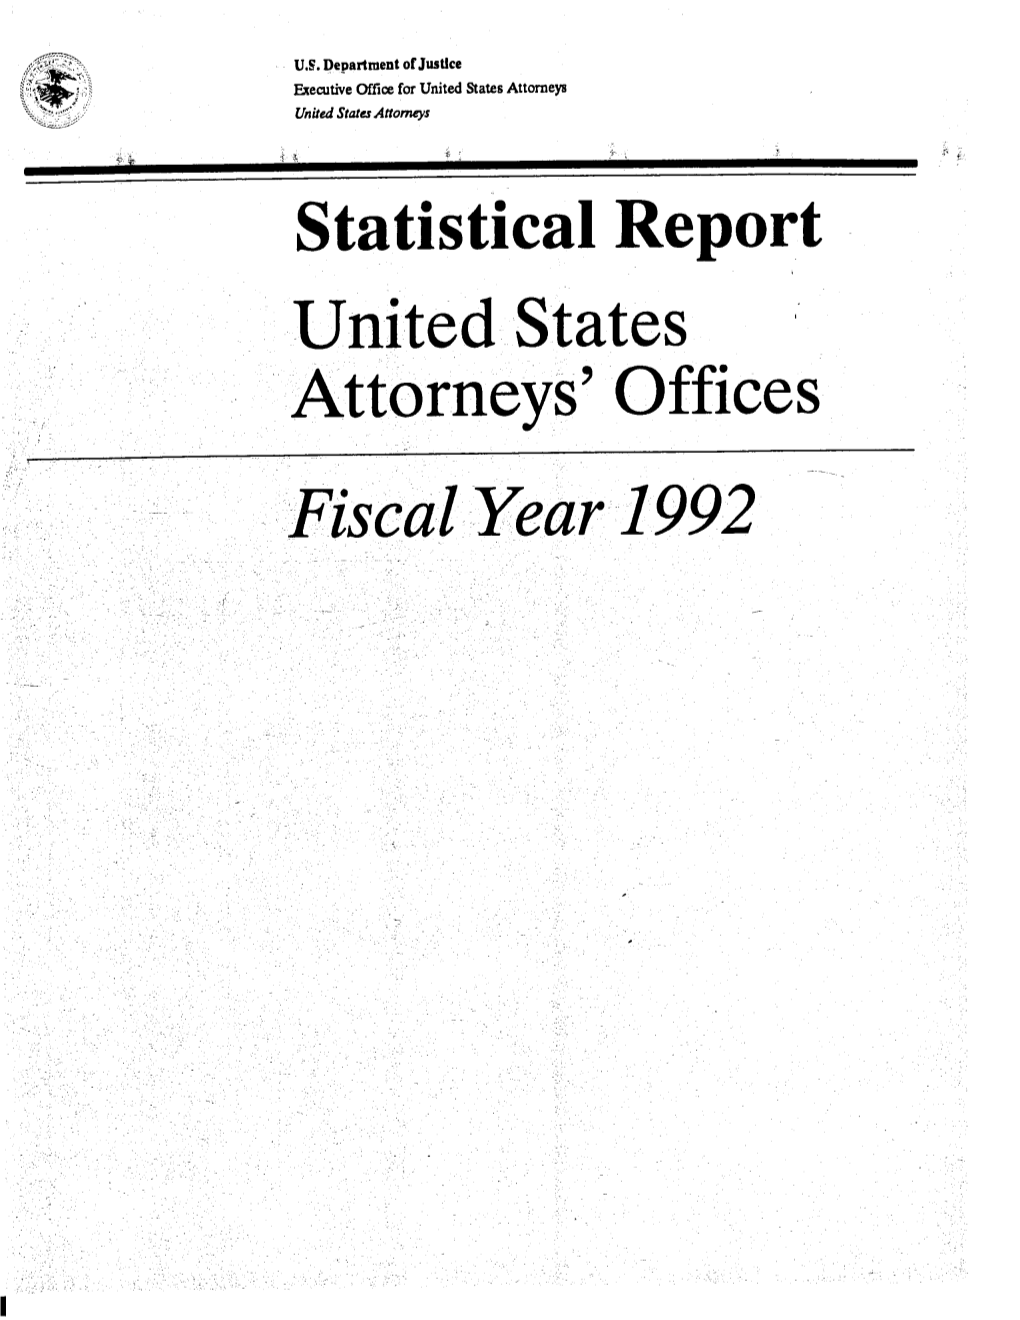 Fiscal Year 1992